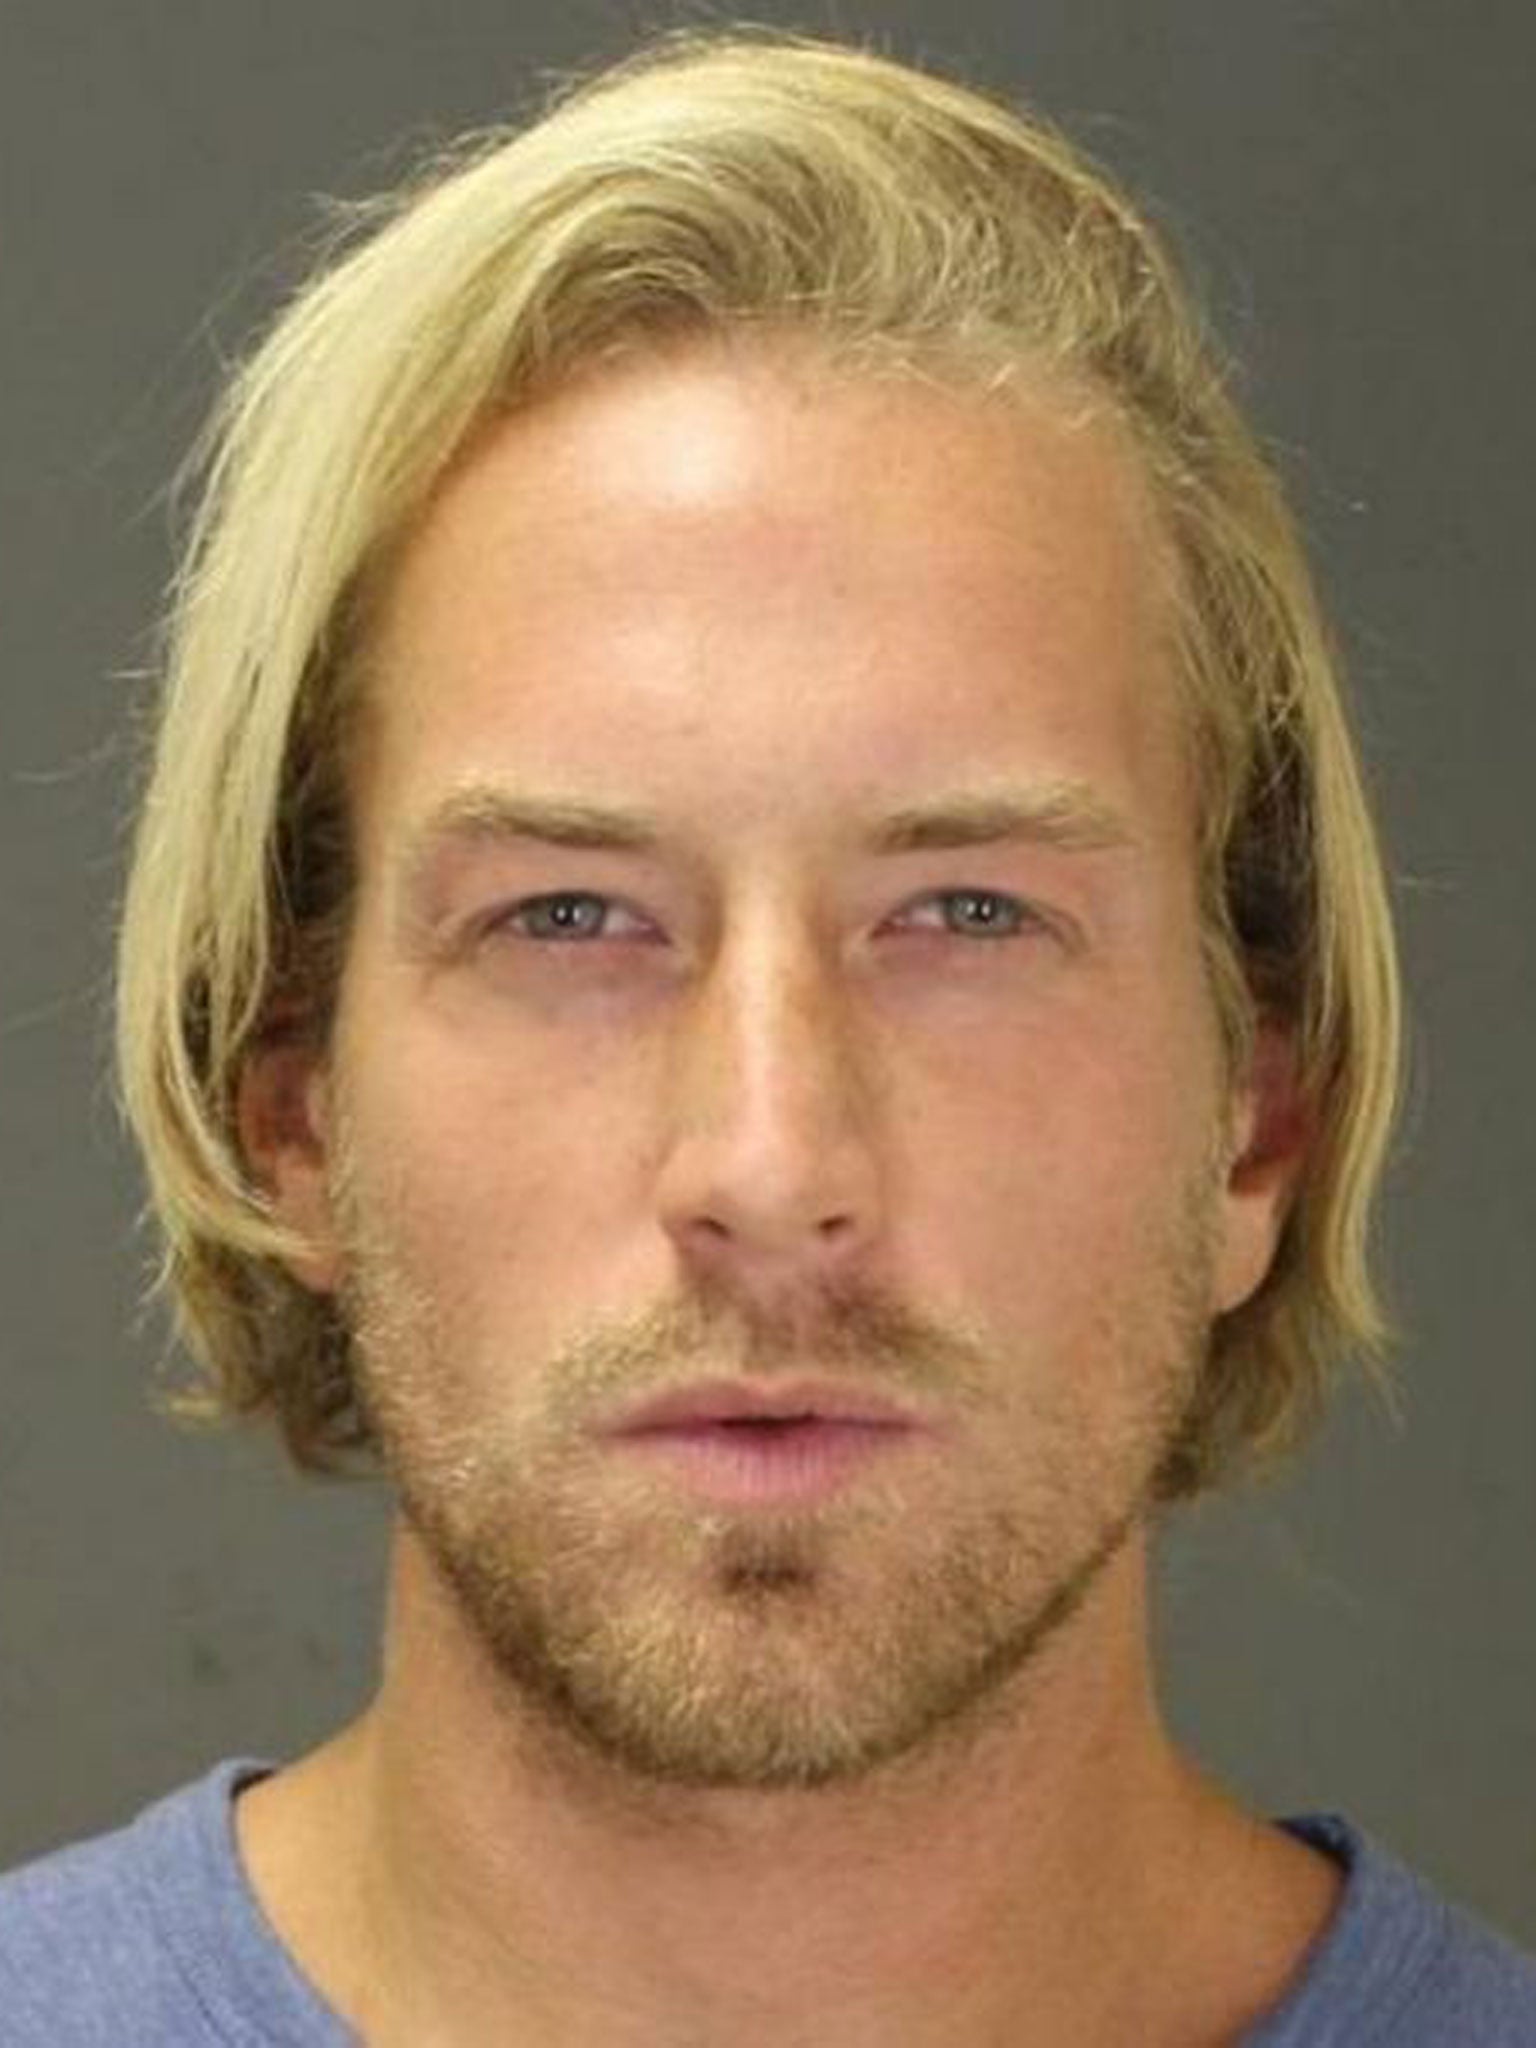 This September 2014 photo provided by the Suffolk County District Attorney's office shows Thomas Gilbert Jnr, after his arrest on 18 September in the town of Southampton, New York, on a misdemeanor charge